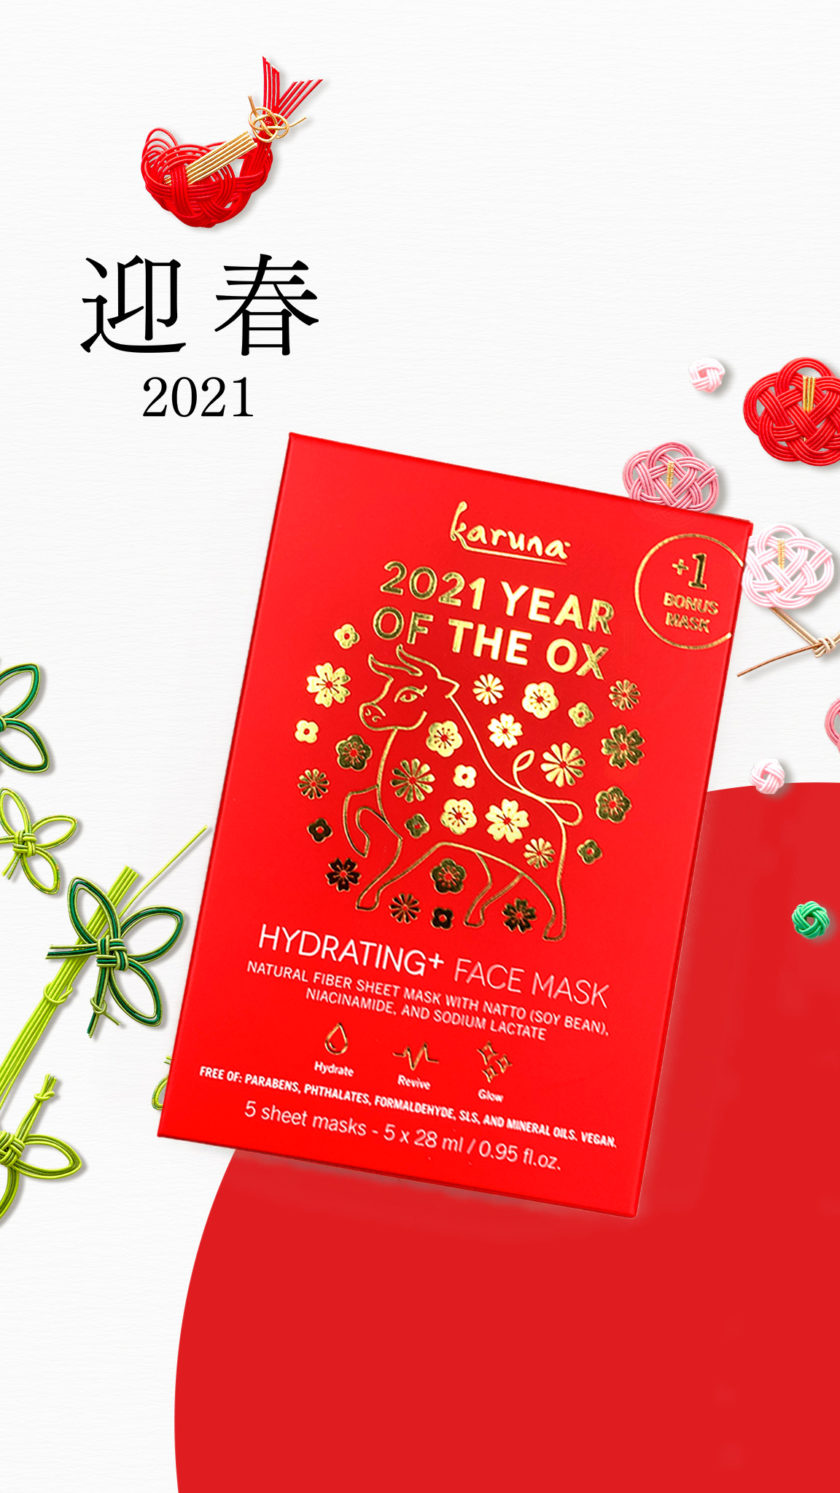 OhMart Karuna 2021 Year of the Ox Hydrating+ Face Mask 3